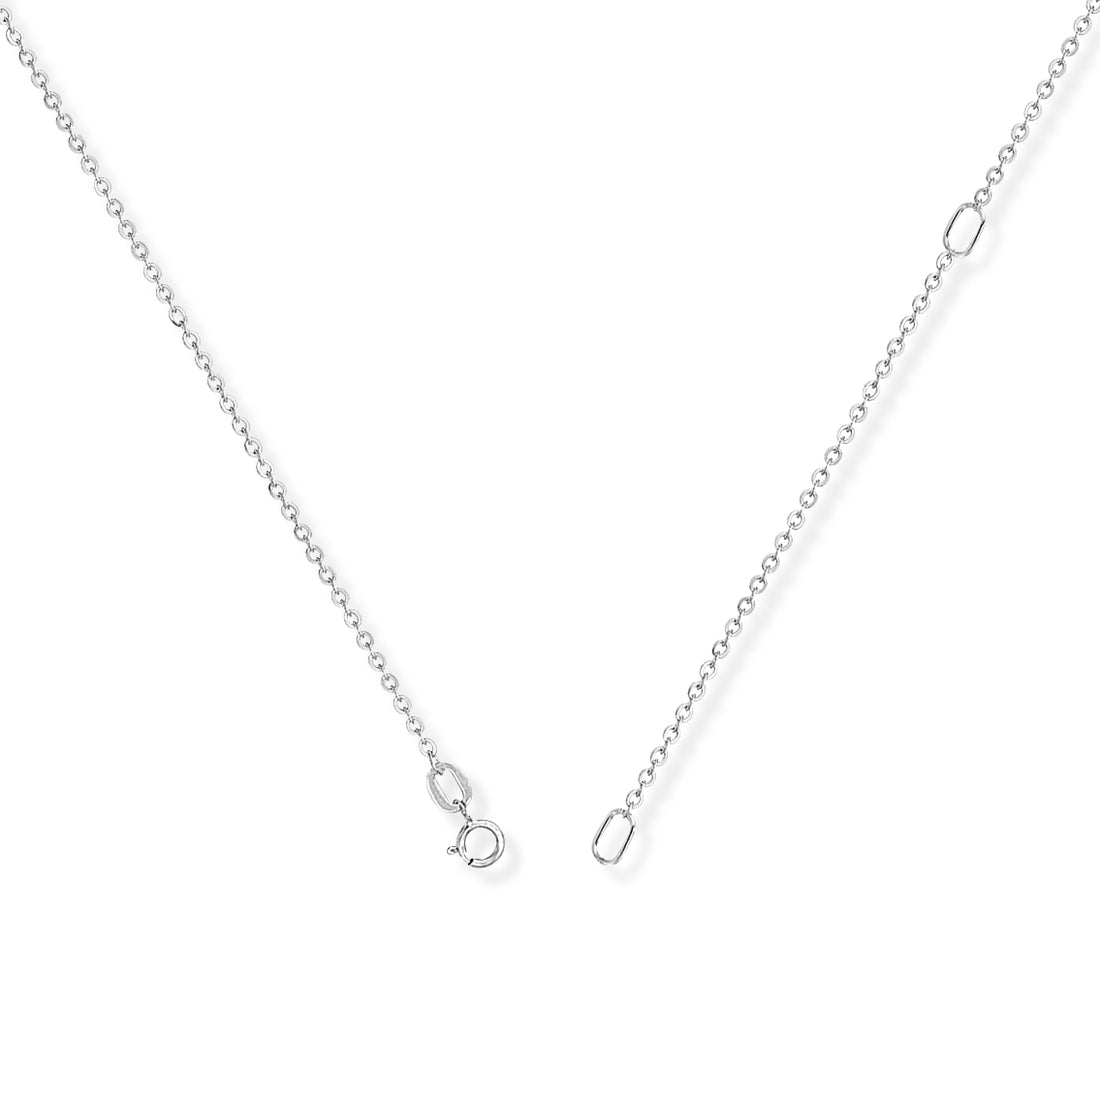 9CT White Gold Convertible Trace Chain — Extendable 16 to 18-inch